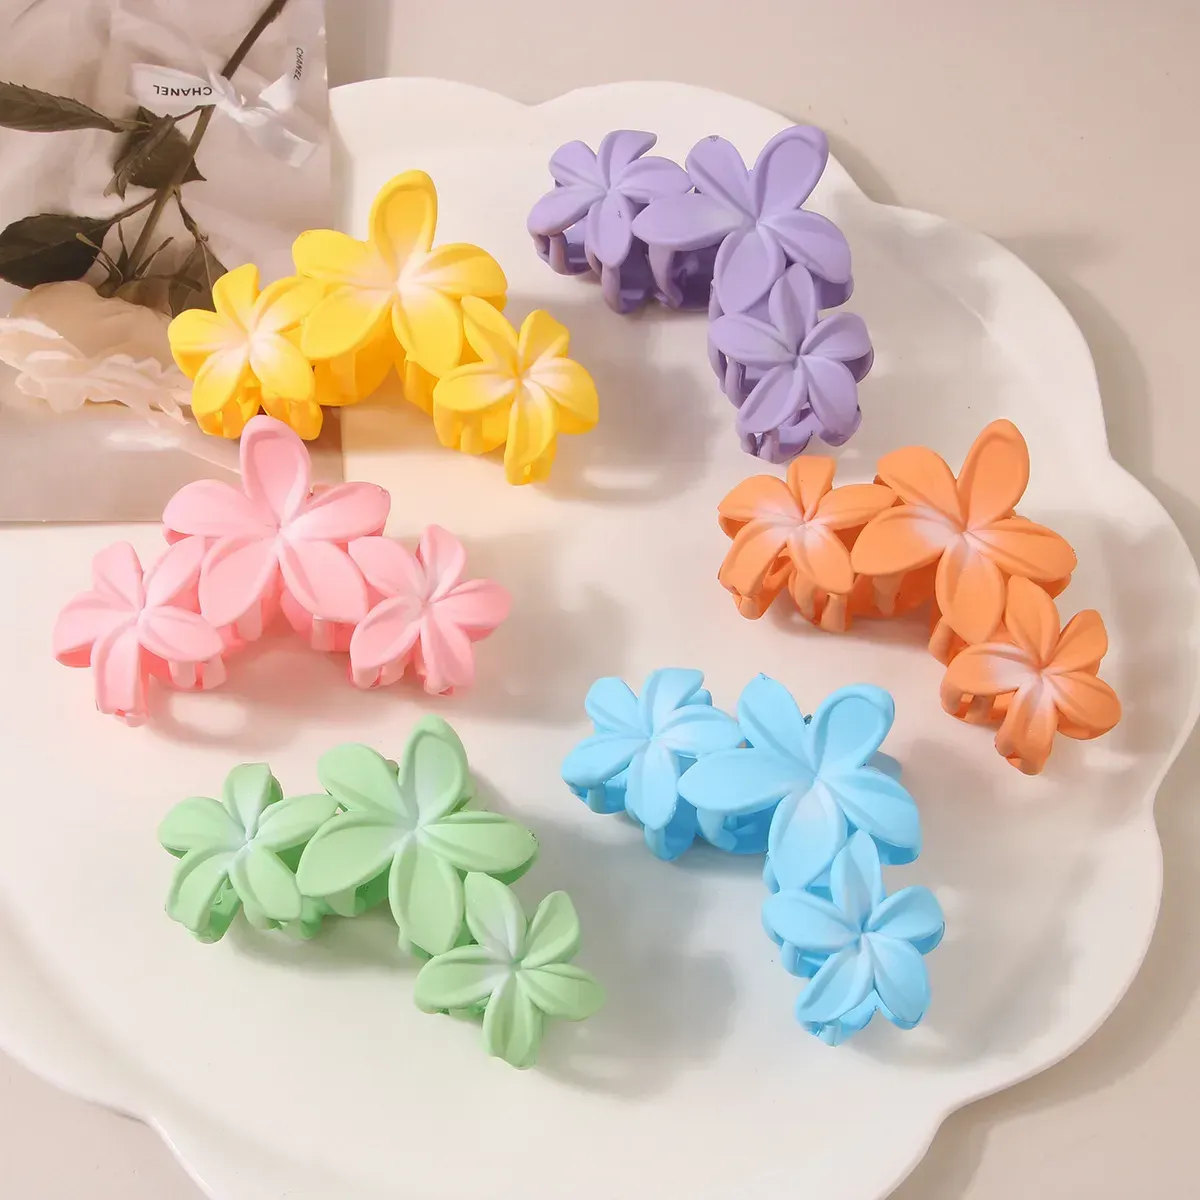 Candy Color Frangipani Hawaiian Flower Coils Clips for Women Hair Claw Clips Cost Fin Graw Claw Clips Beach Tropical Accessoires